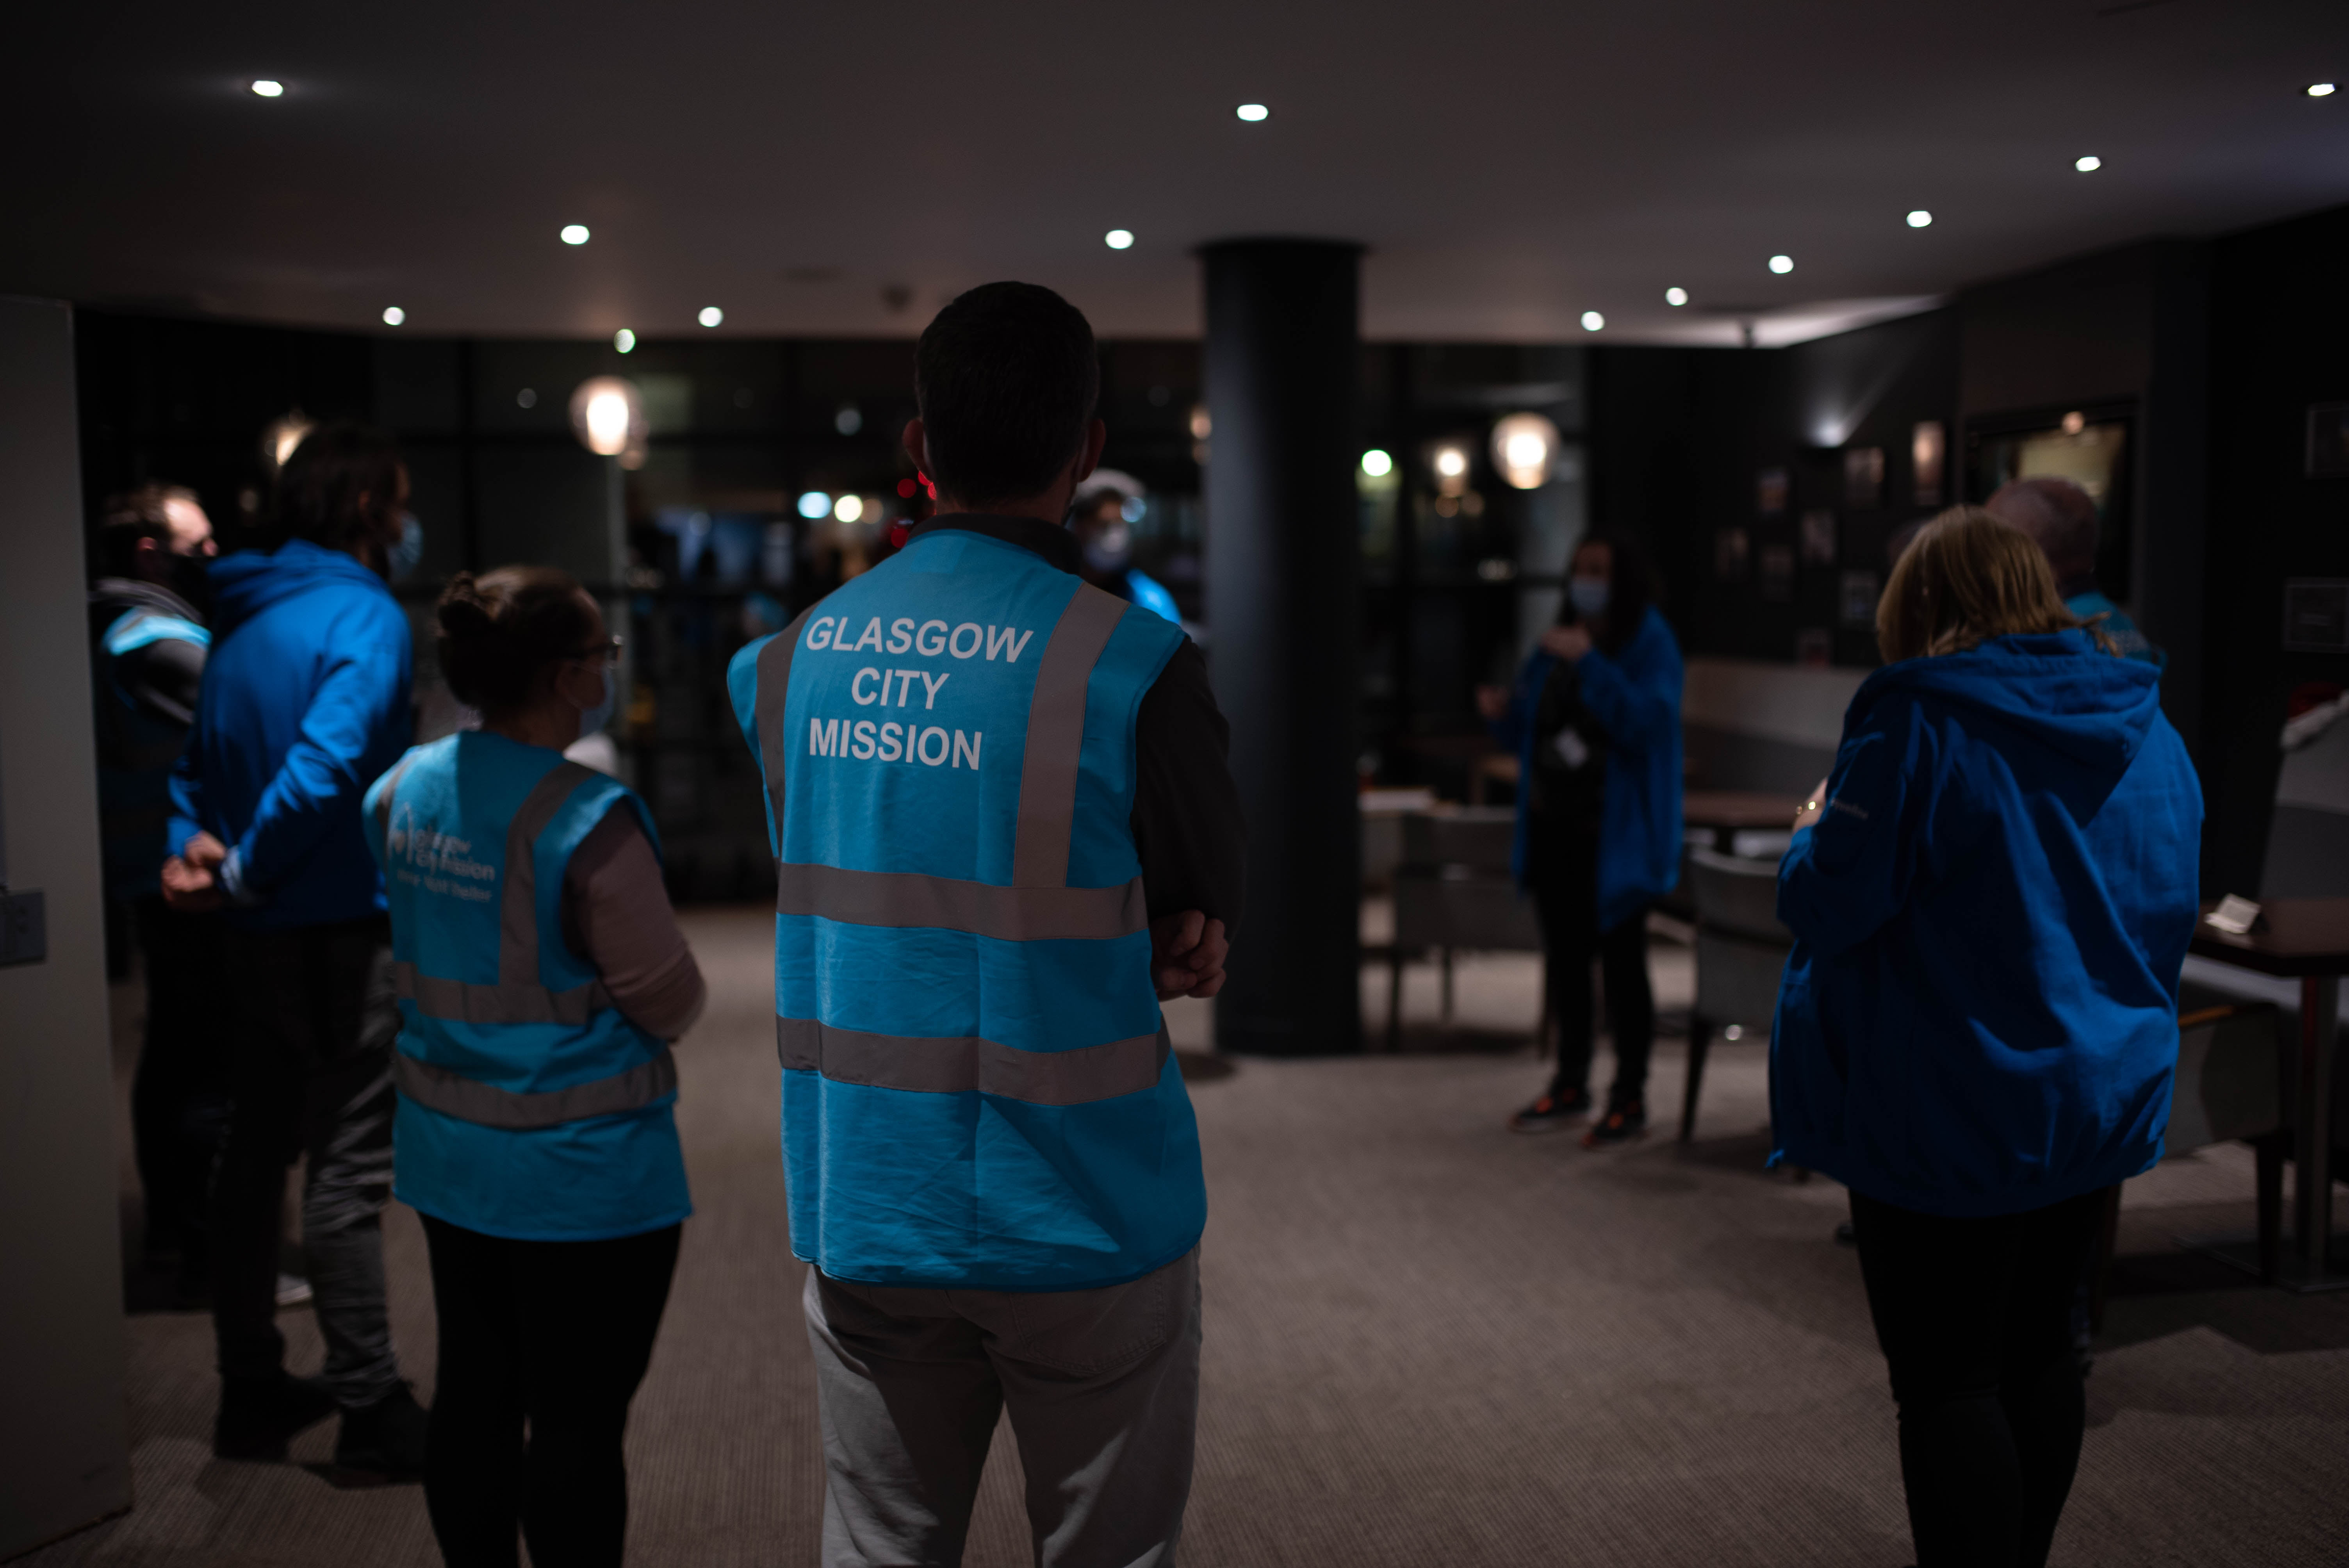 Glasgow City Mission to operate Overnight Welcome Centre